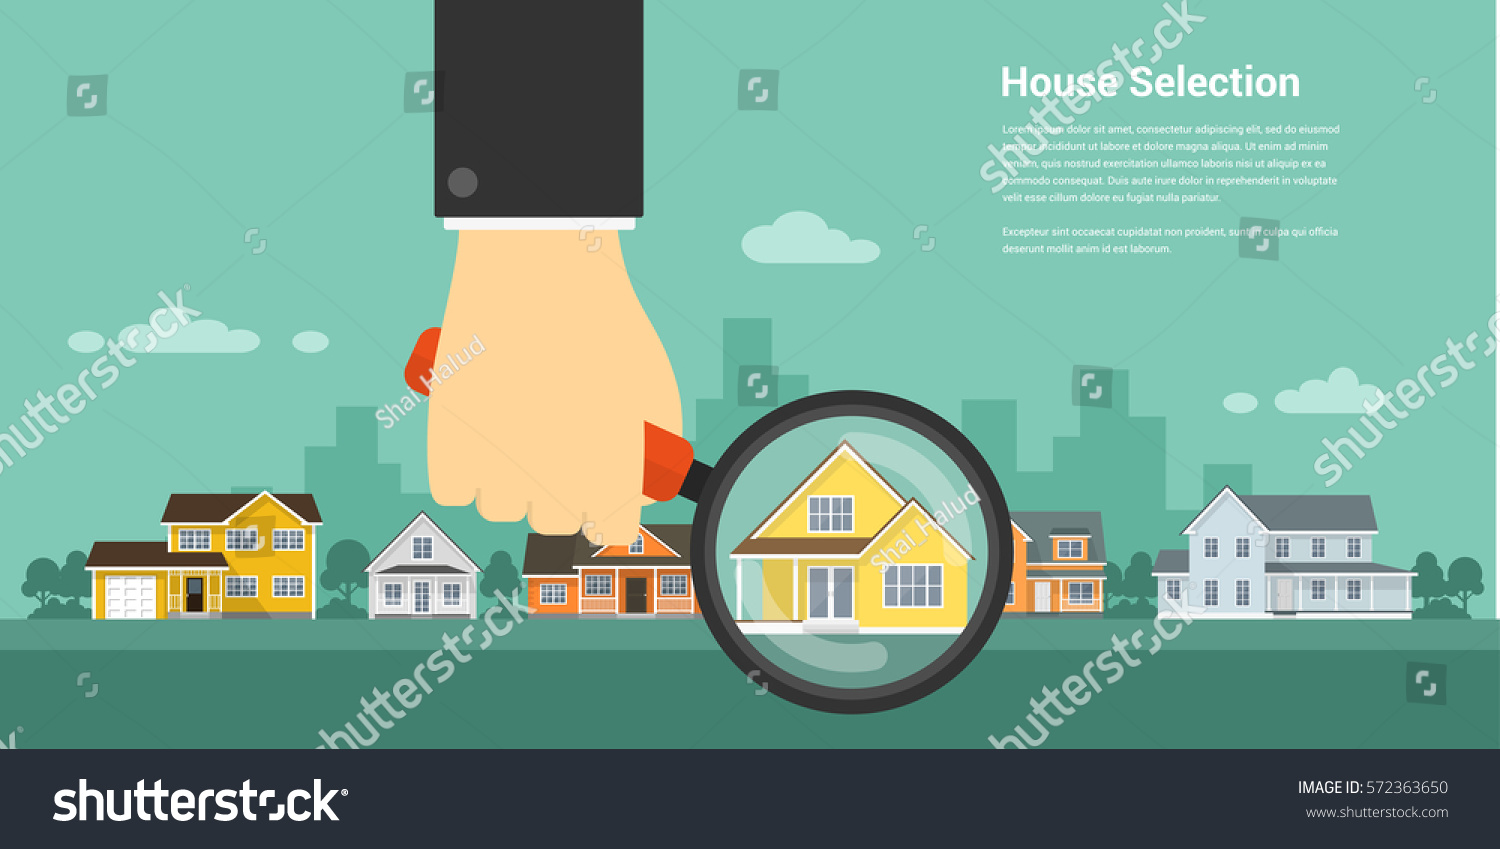 SVG of picture of a human hand holding magnifying glass and number of houses, house selection, house project, real estate concept, flat style illustration svg